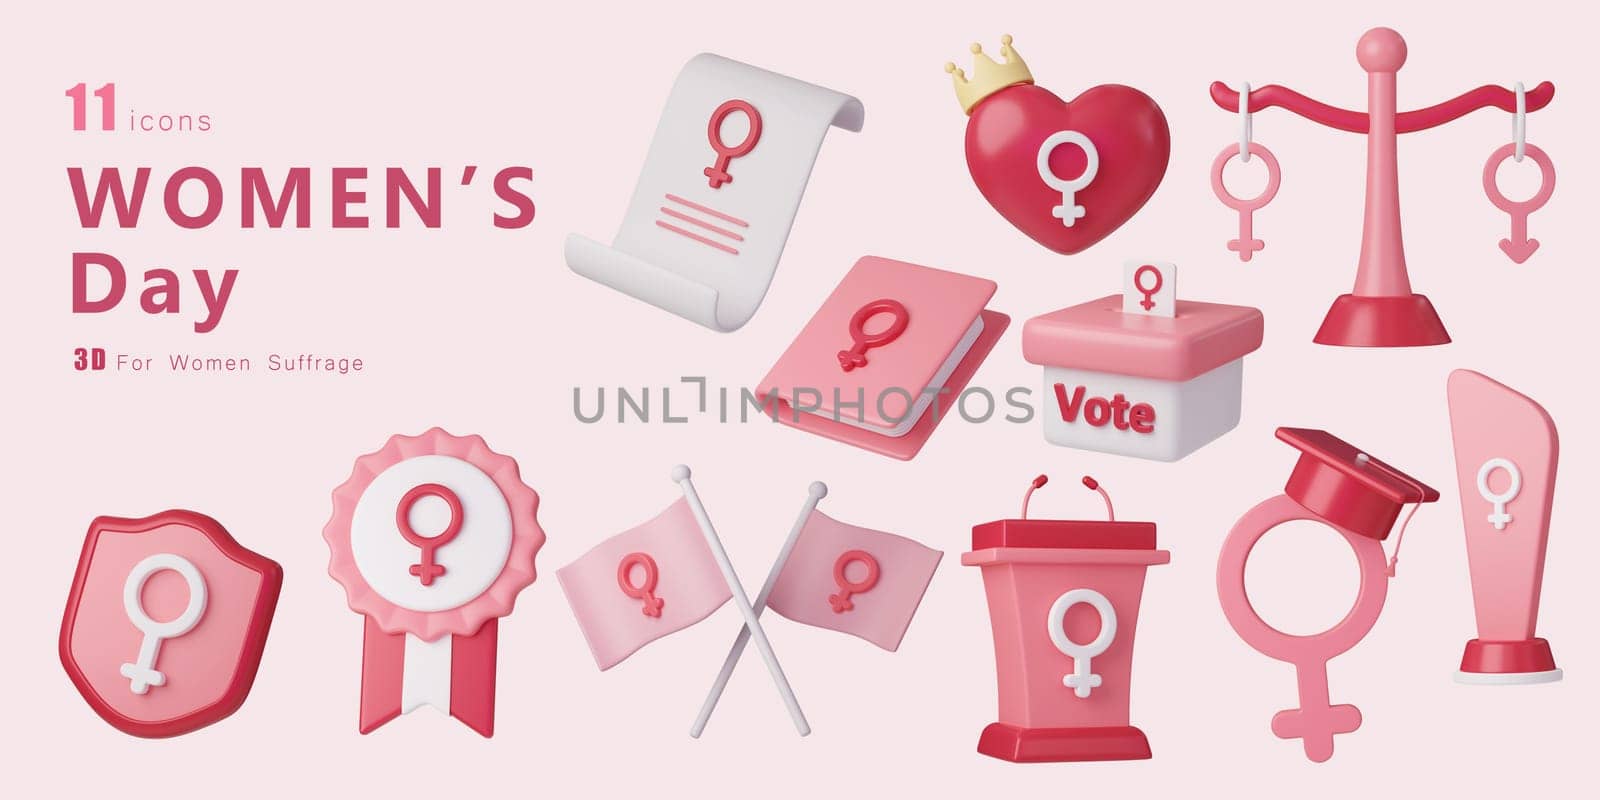 3d Women's suffrage icon set , For equality andwoman's Day, march 8. Raise awareness, prevention, detection, treatment. Icon design 3d illustration.